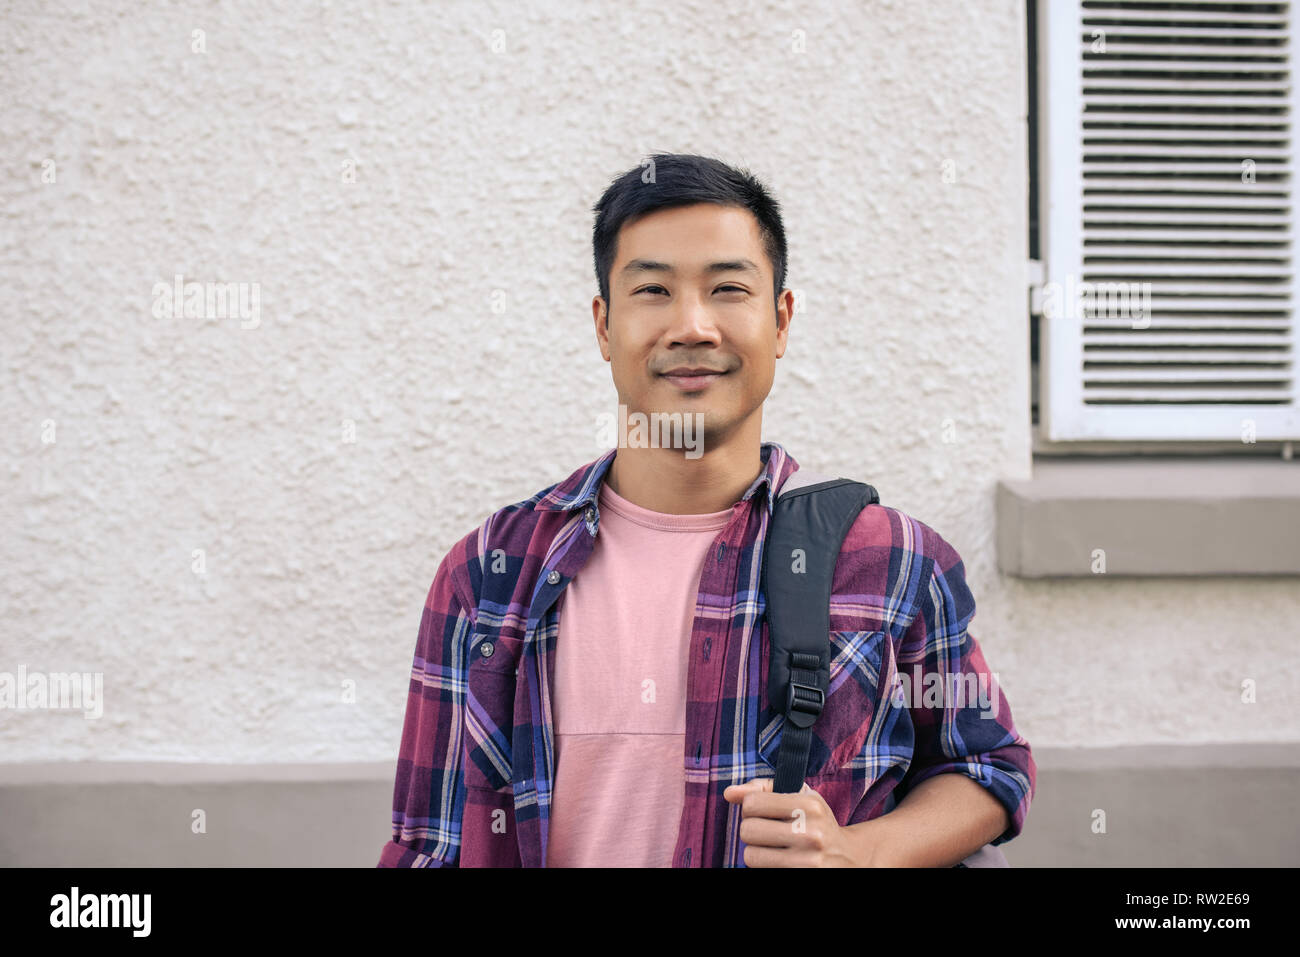 Young Asian man standing outside in the city and smiling Stock Photo